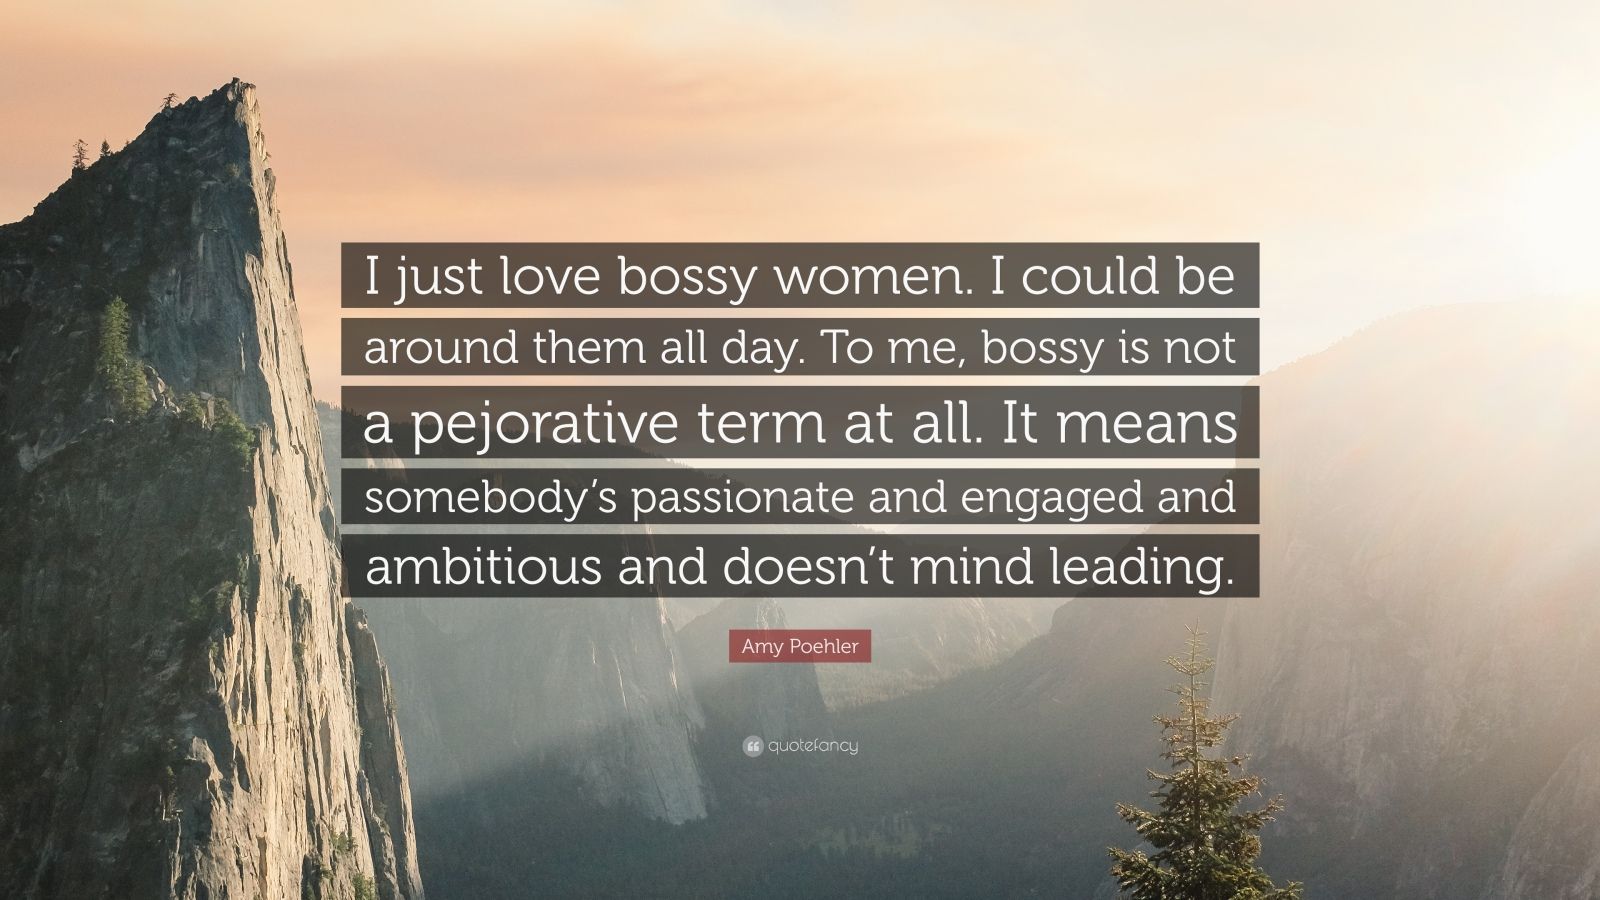 Amy Poehler Quote “i Just Love Bossy Women I Could Be Around Them All Day To Me Bossy Is Not 